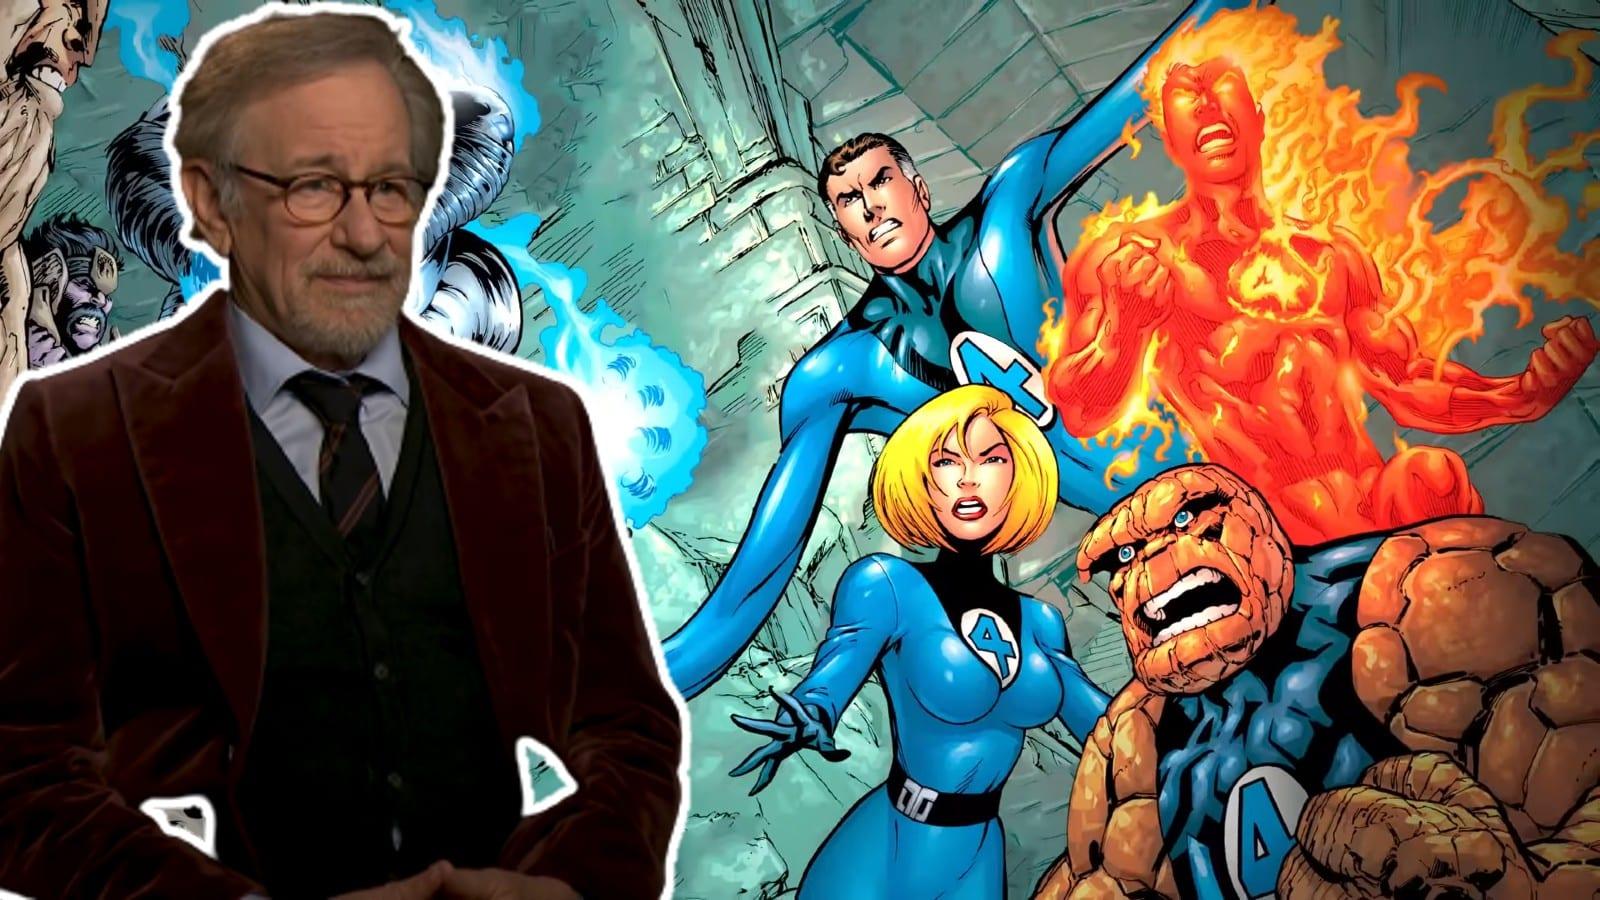 Marvel approached Steven Spielberg to direct the Fantastic Four movie.